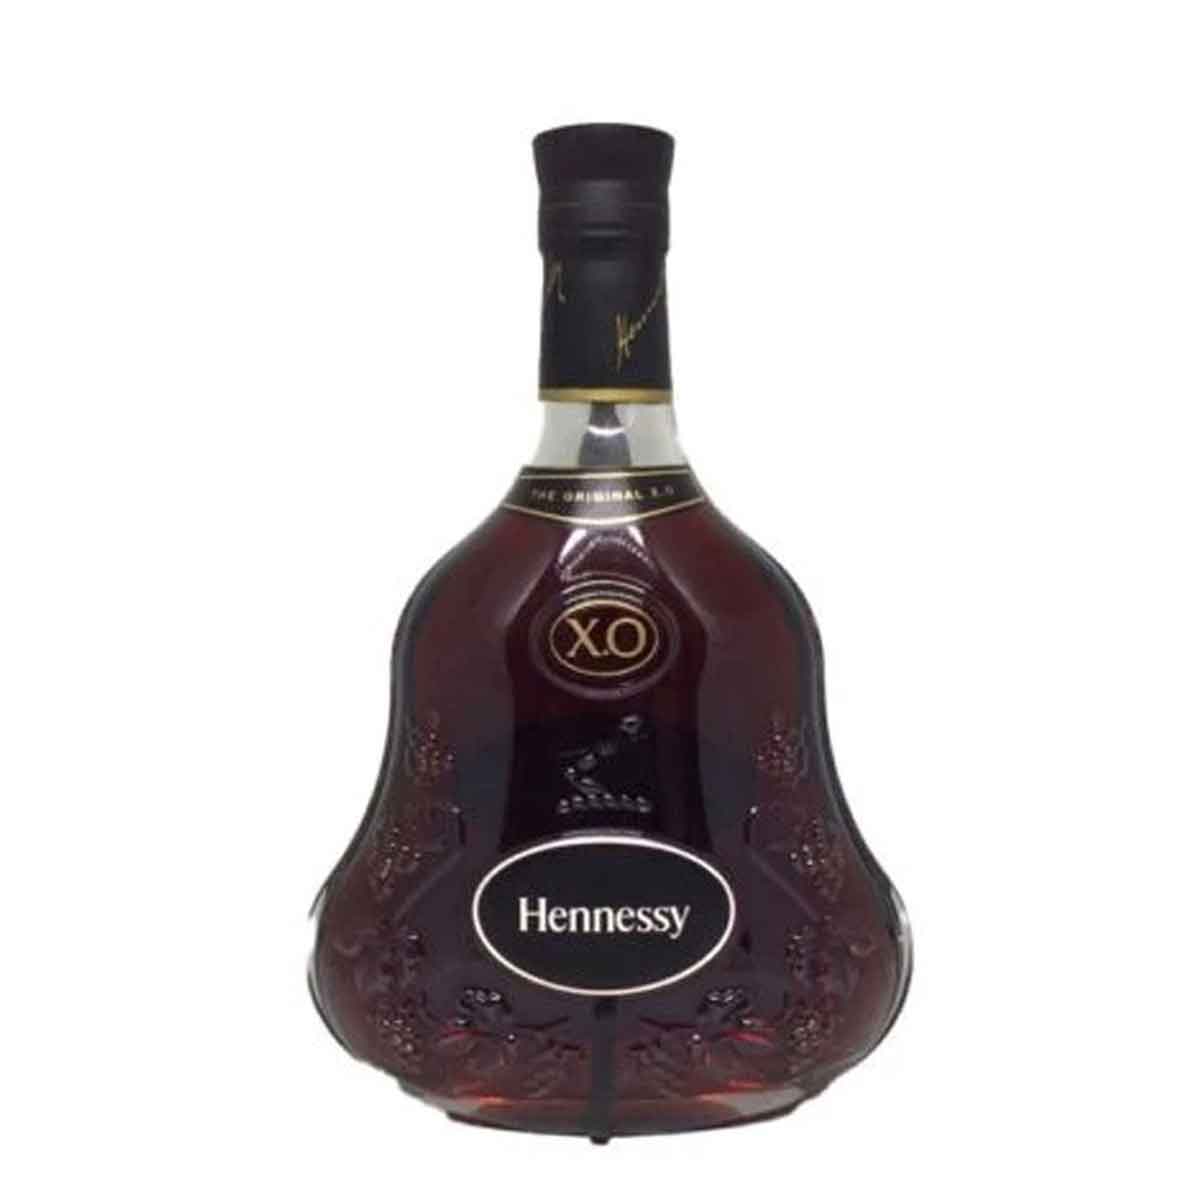 Tag Liquor Stores Delivery BC - Hennessy XO Cognac Luminous 750ml